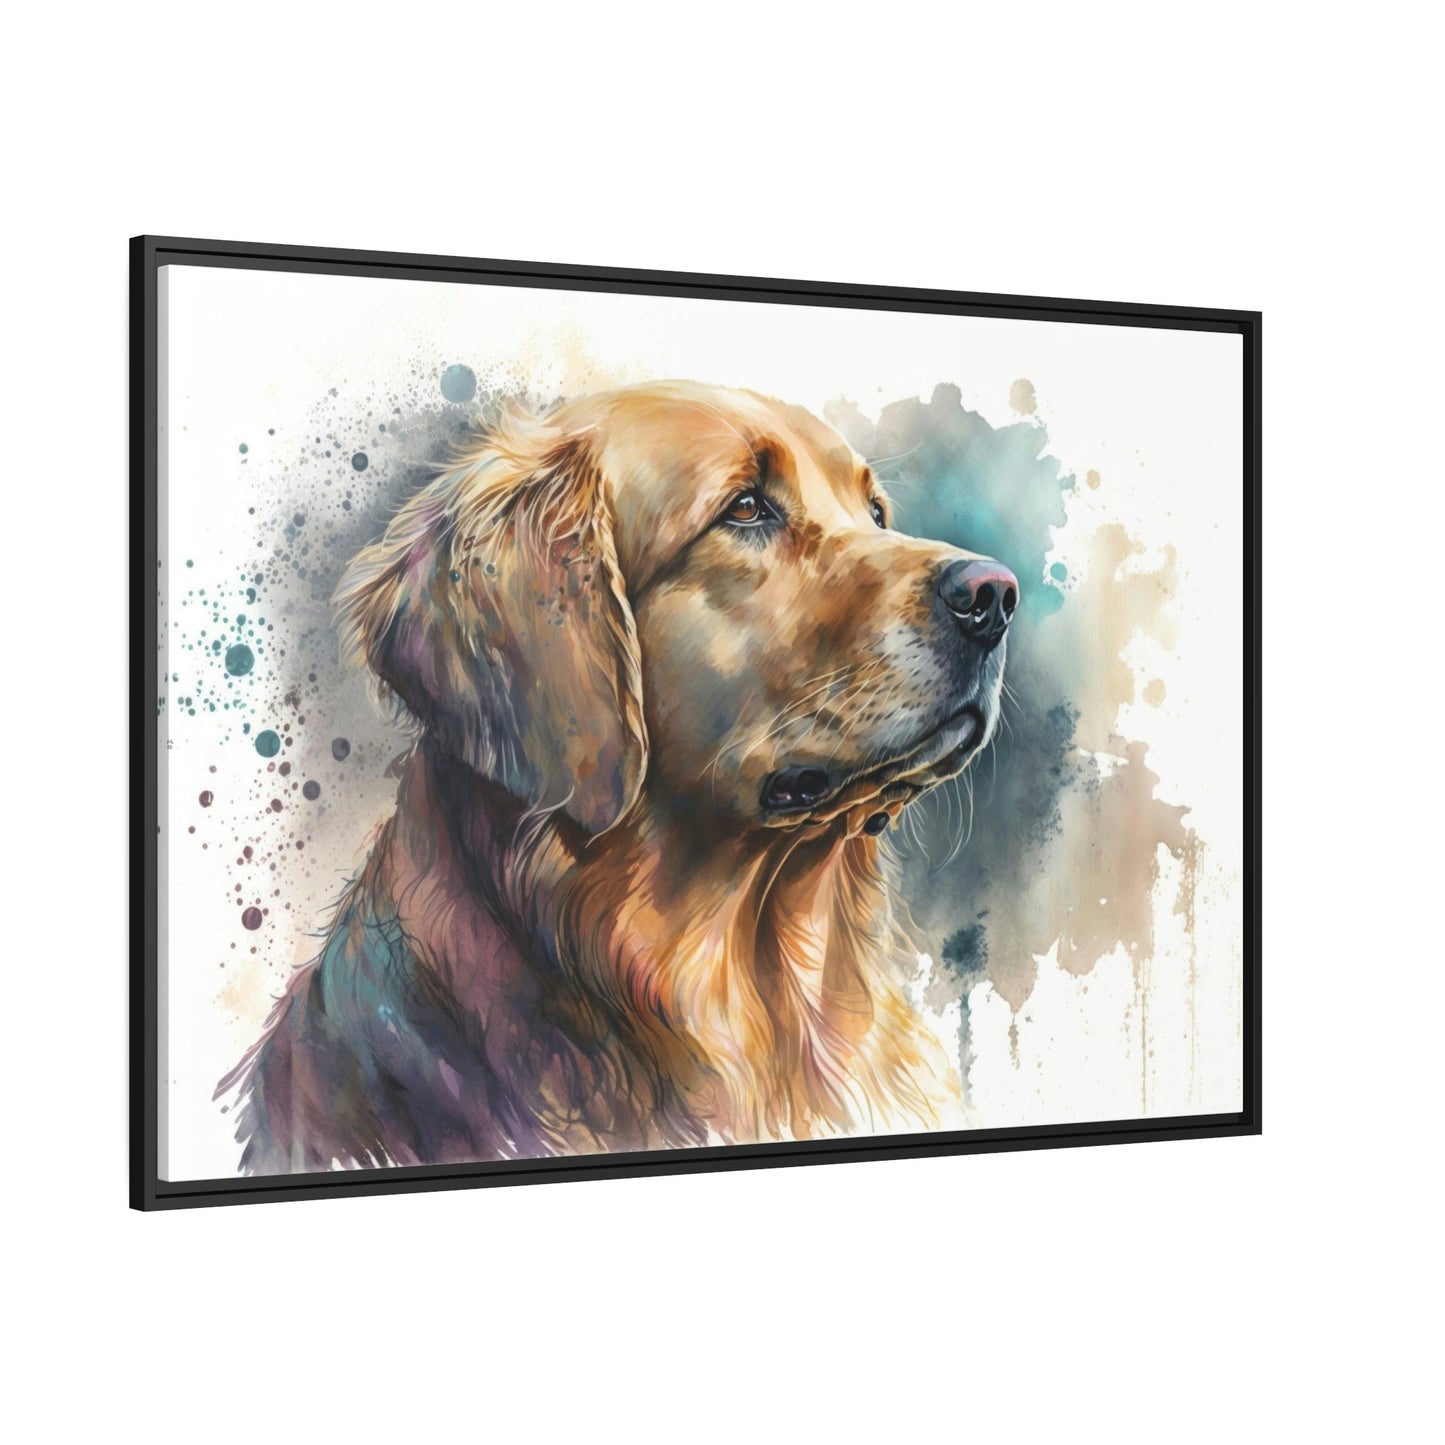 Dog's World: Framed Poster of a Happy Dog on Canvas